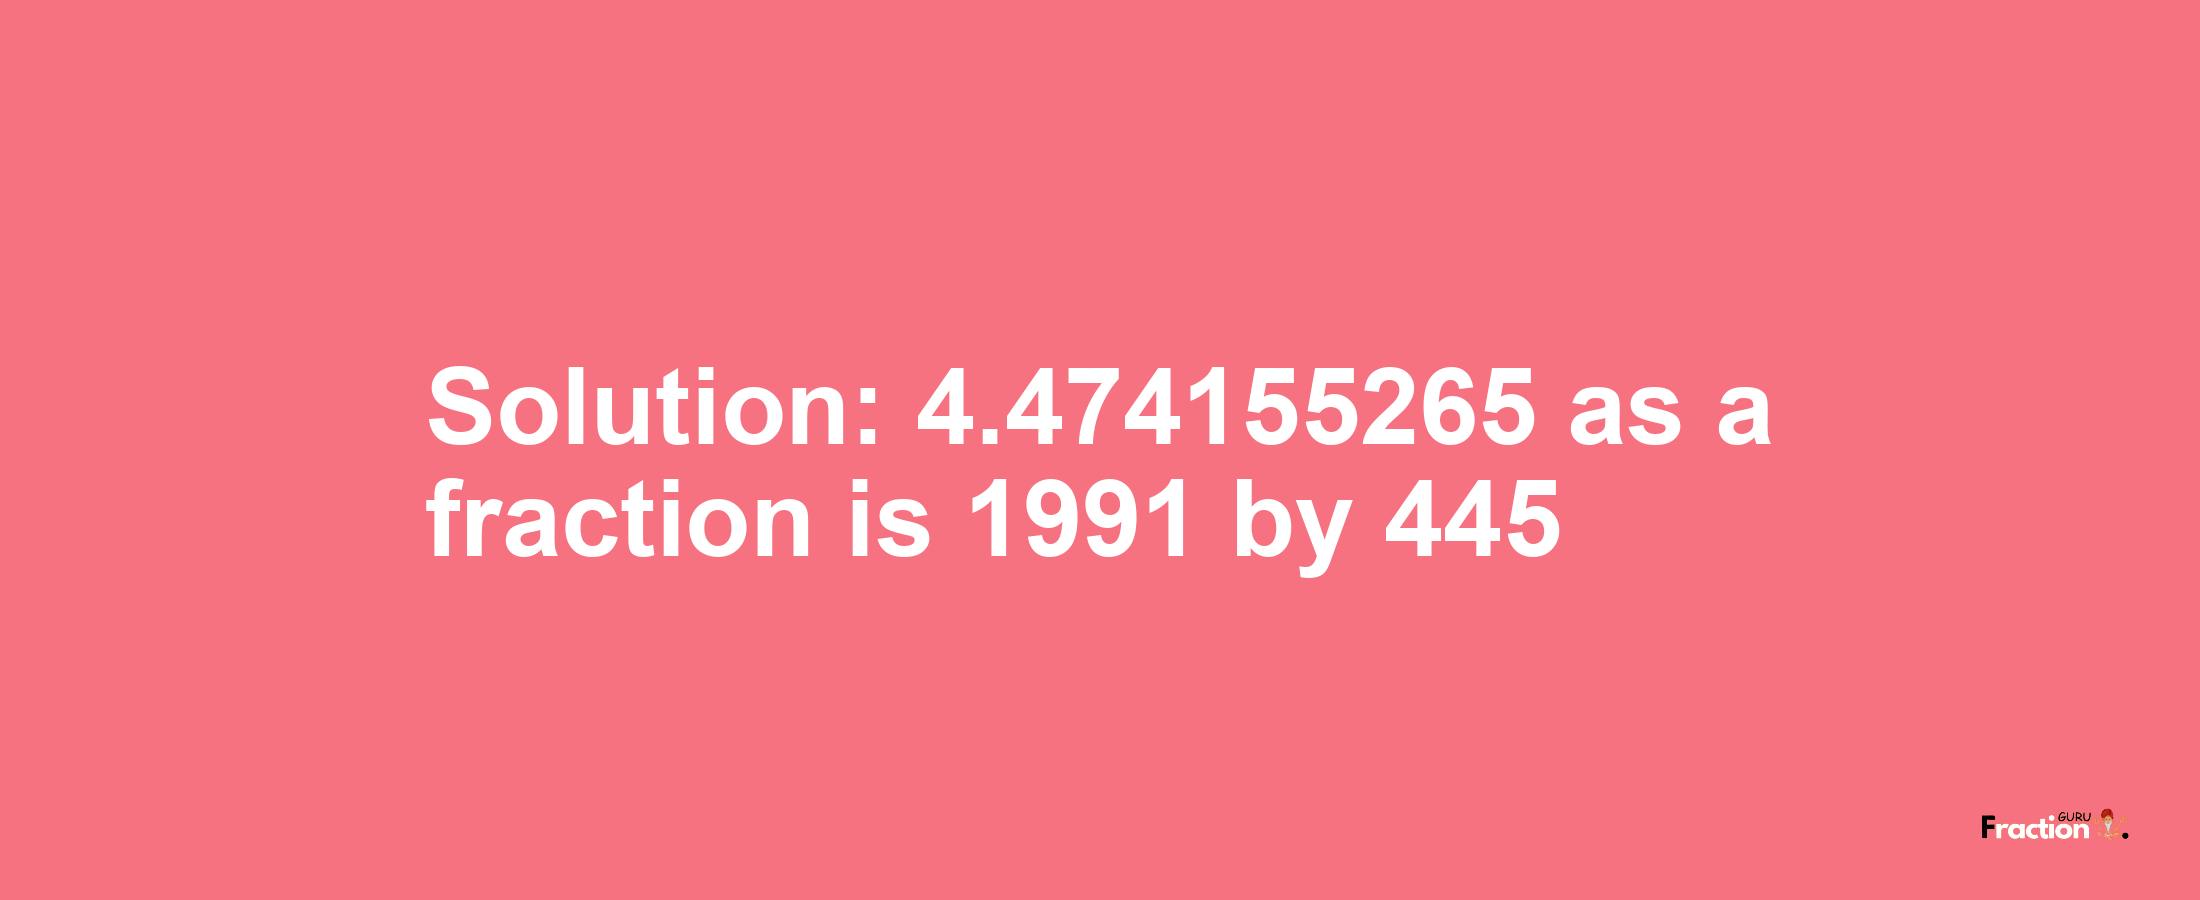 Solution:4.474155265 as a fraction is 1991/445